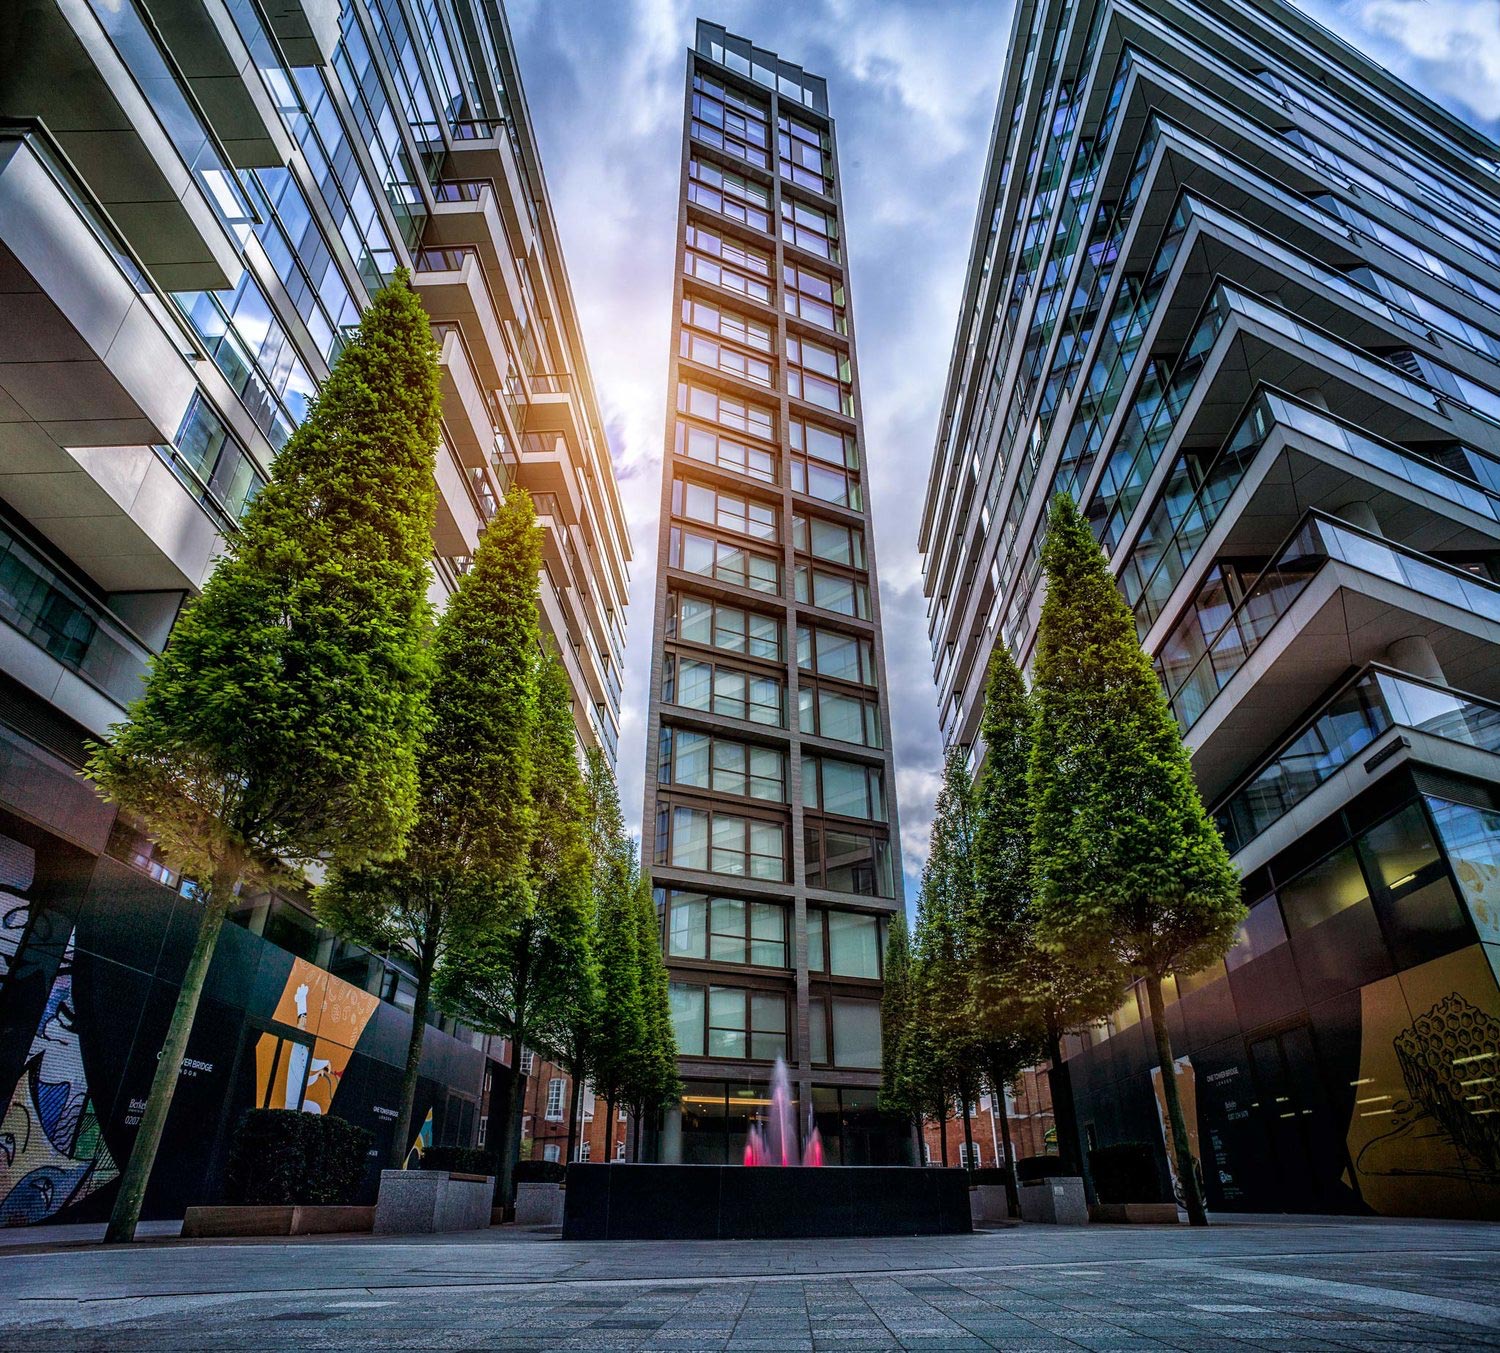 Low-angle shot of a modern apartment building near Tower Bridge, captured by Wright Content. The glass-fronted tower rises against a backdrop of green trees.